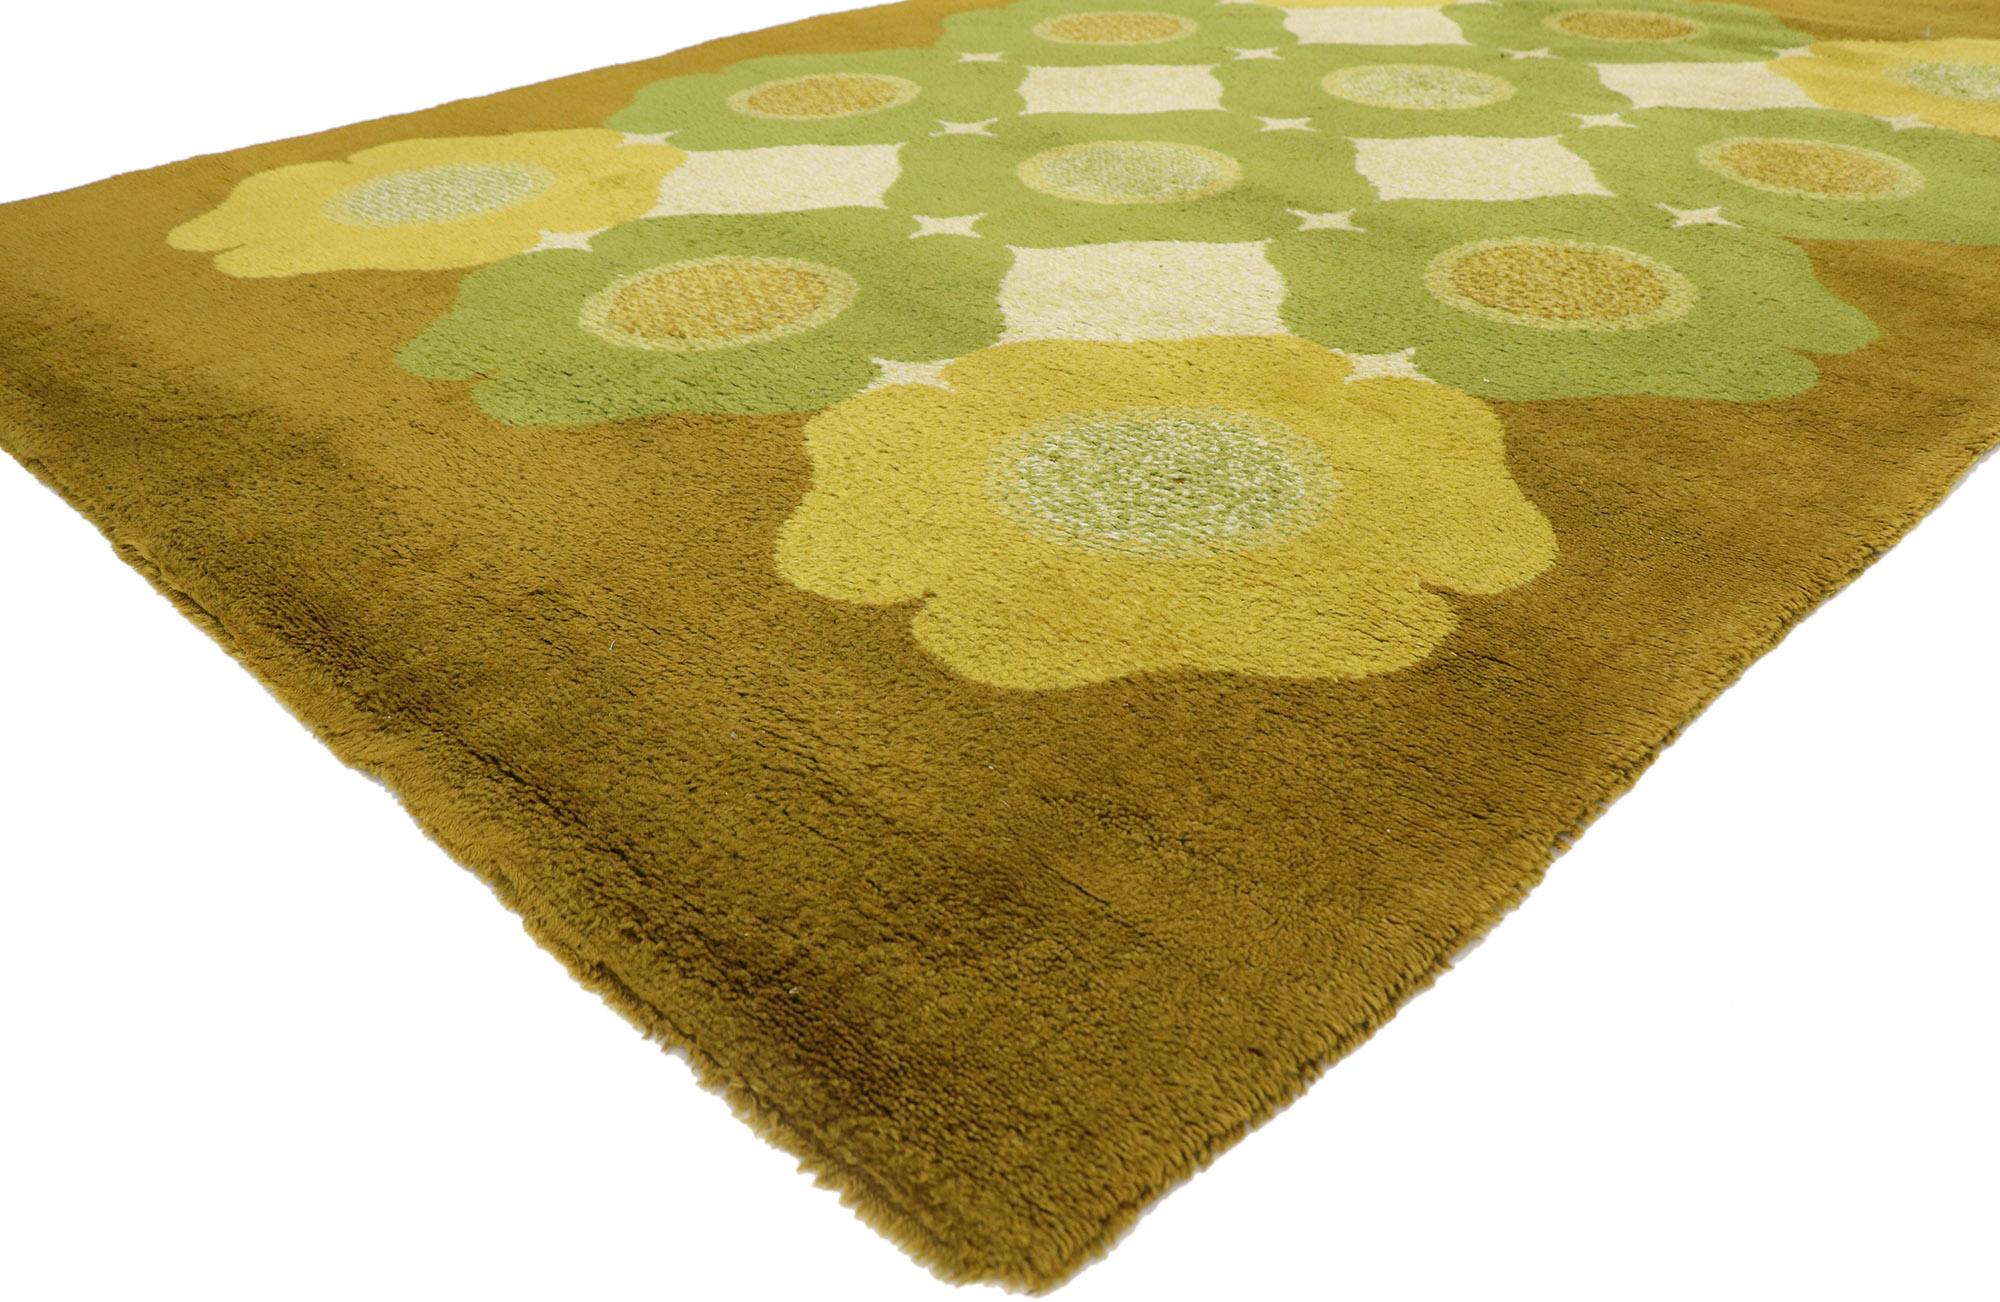 78106 Vintage German Herforder Teppiche rug with Mid-Century Modern Style 06'05 x 09'08. Showcasing a retro geometric pattern with incredible detail and texture, this hand-knotted wool vintage German Herforder Teppiche rug beautifully embodies a